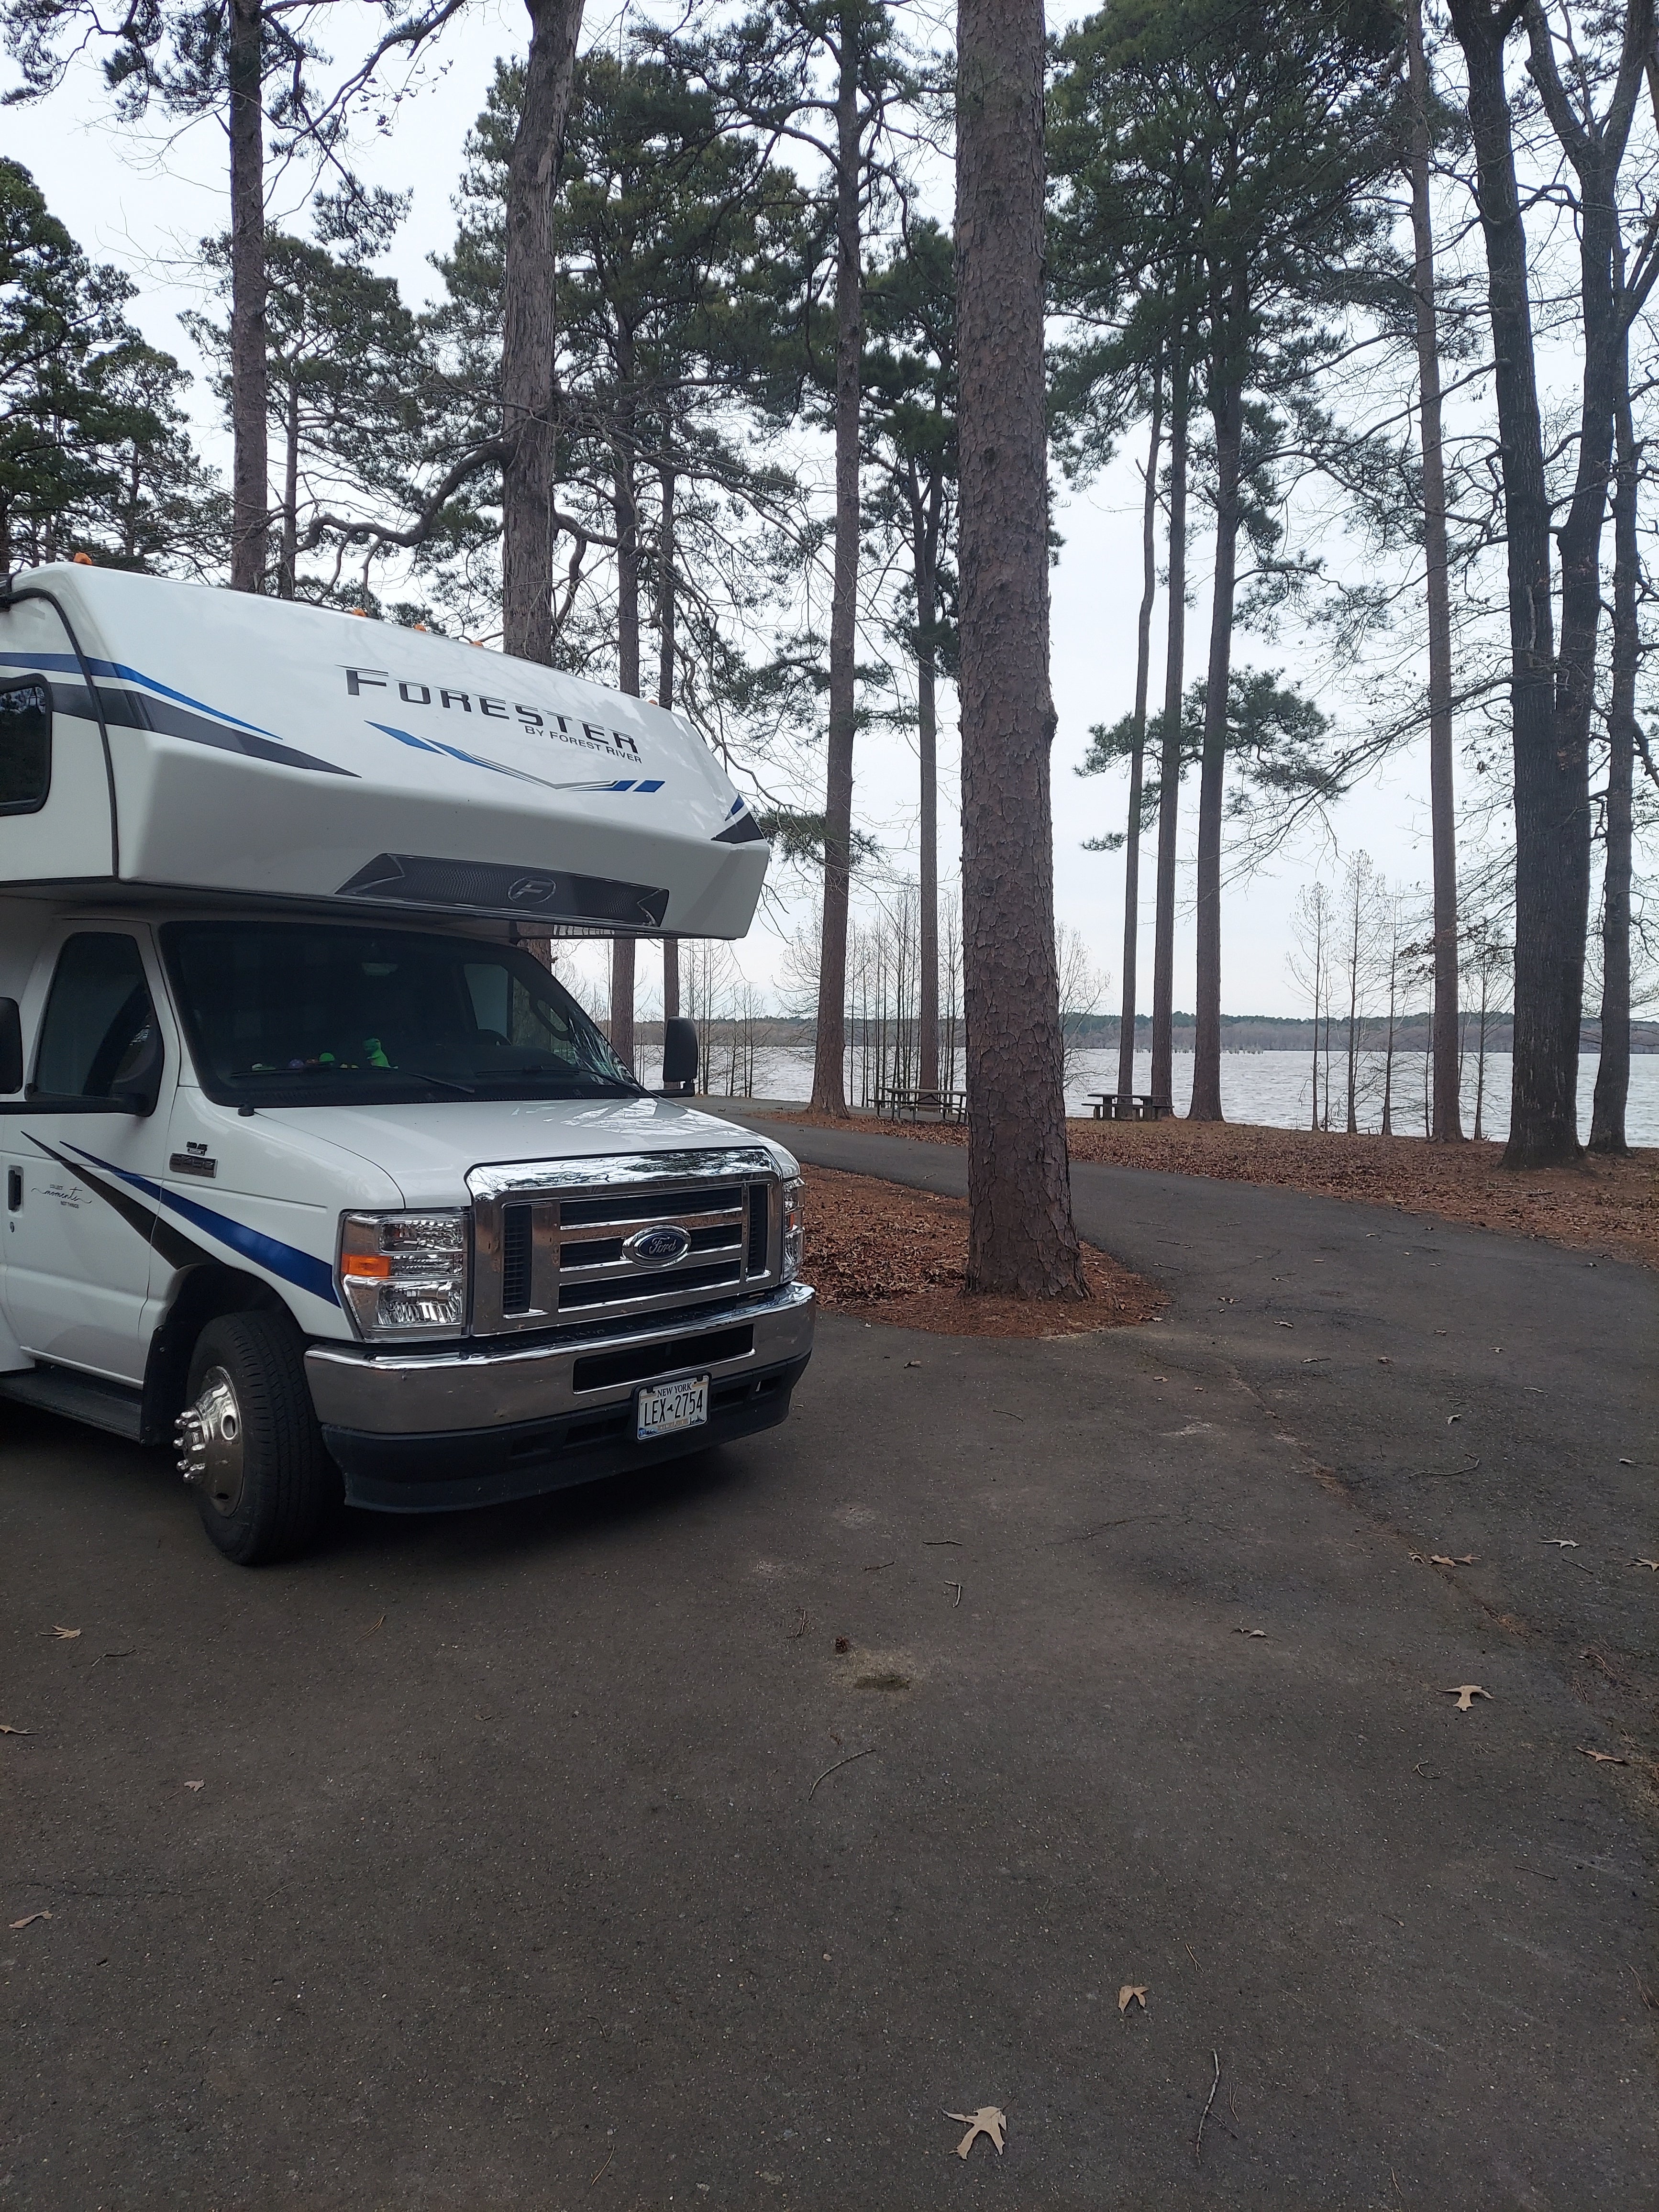 Camper submitted image from Corney Lake South Shore Campground - 5